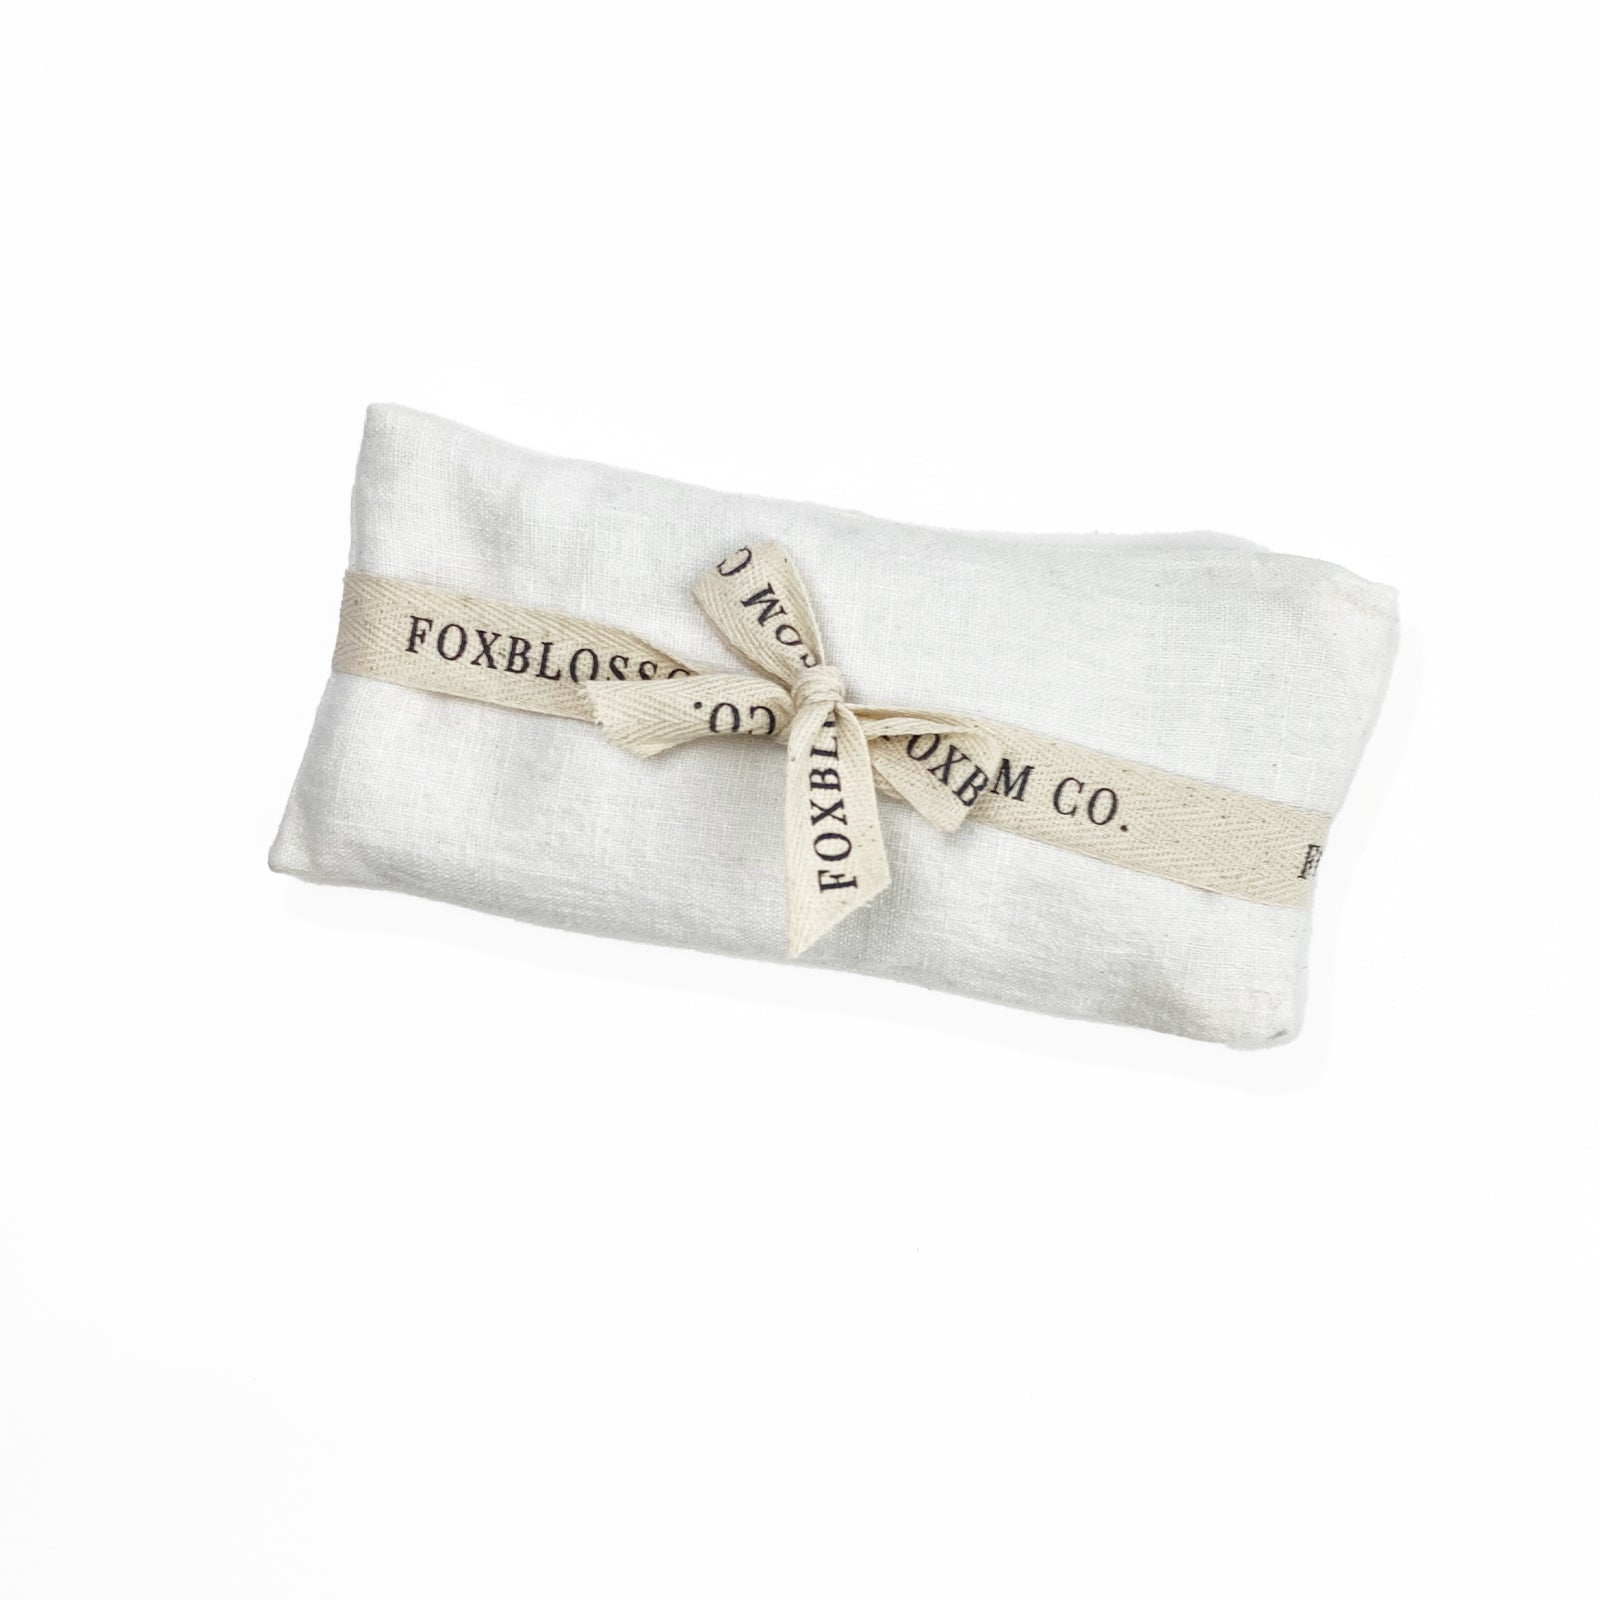 White, Washed linen, 8.5" x 4", weighted eye pillow, Silk case filled with flaxseed and lavender.